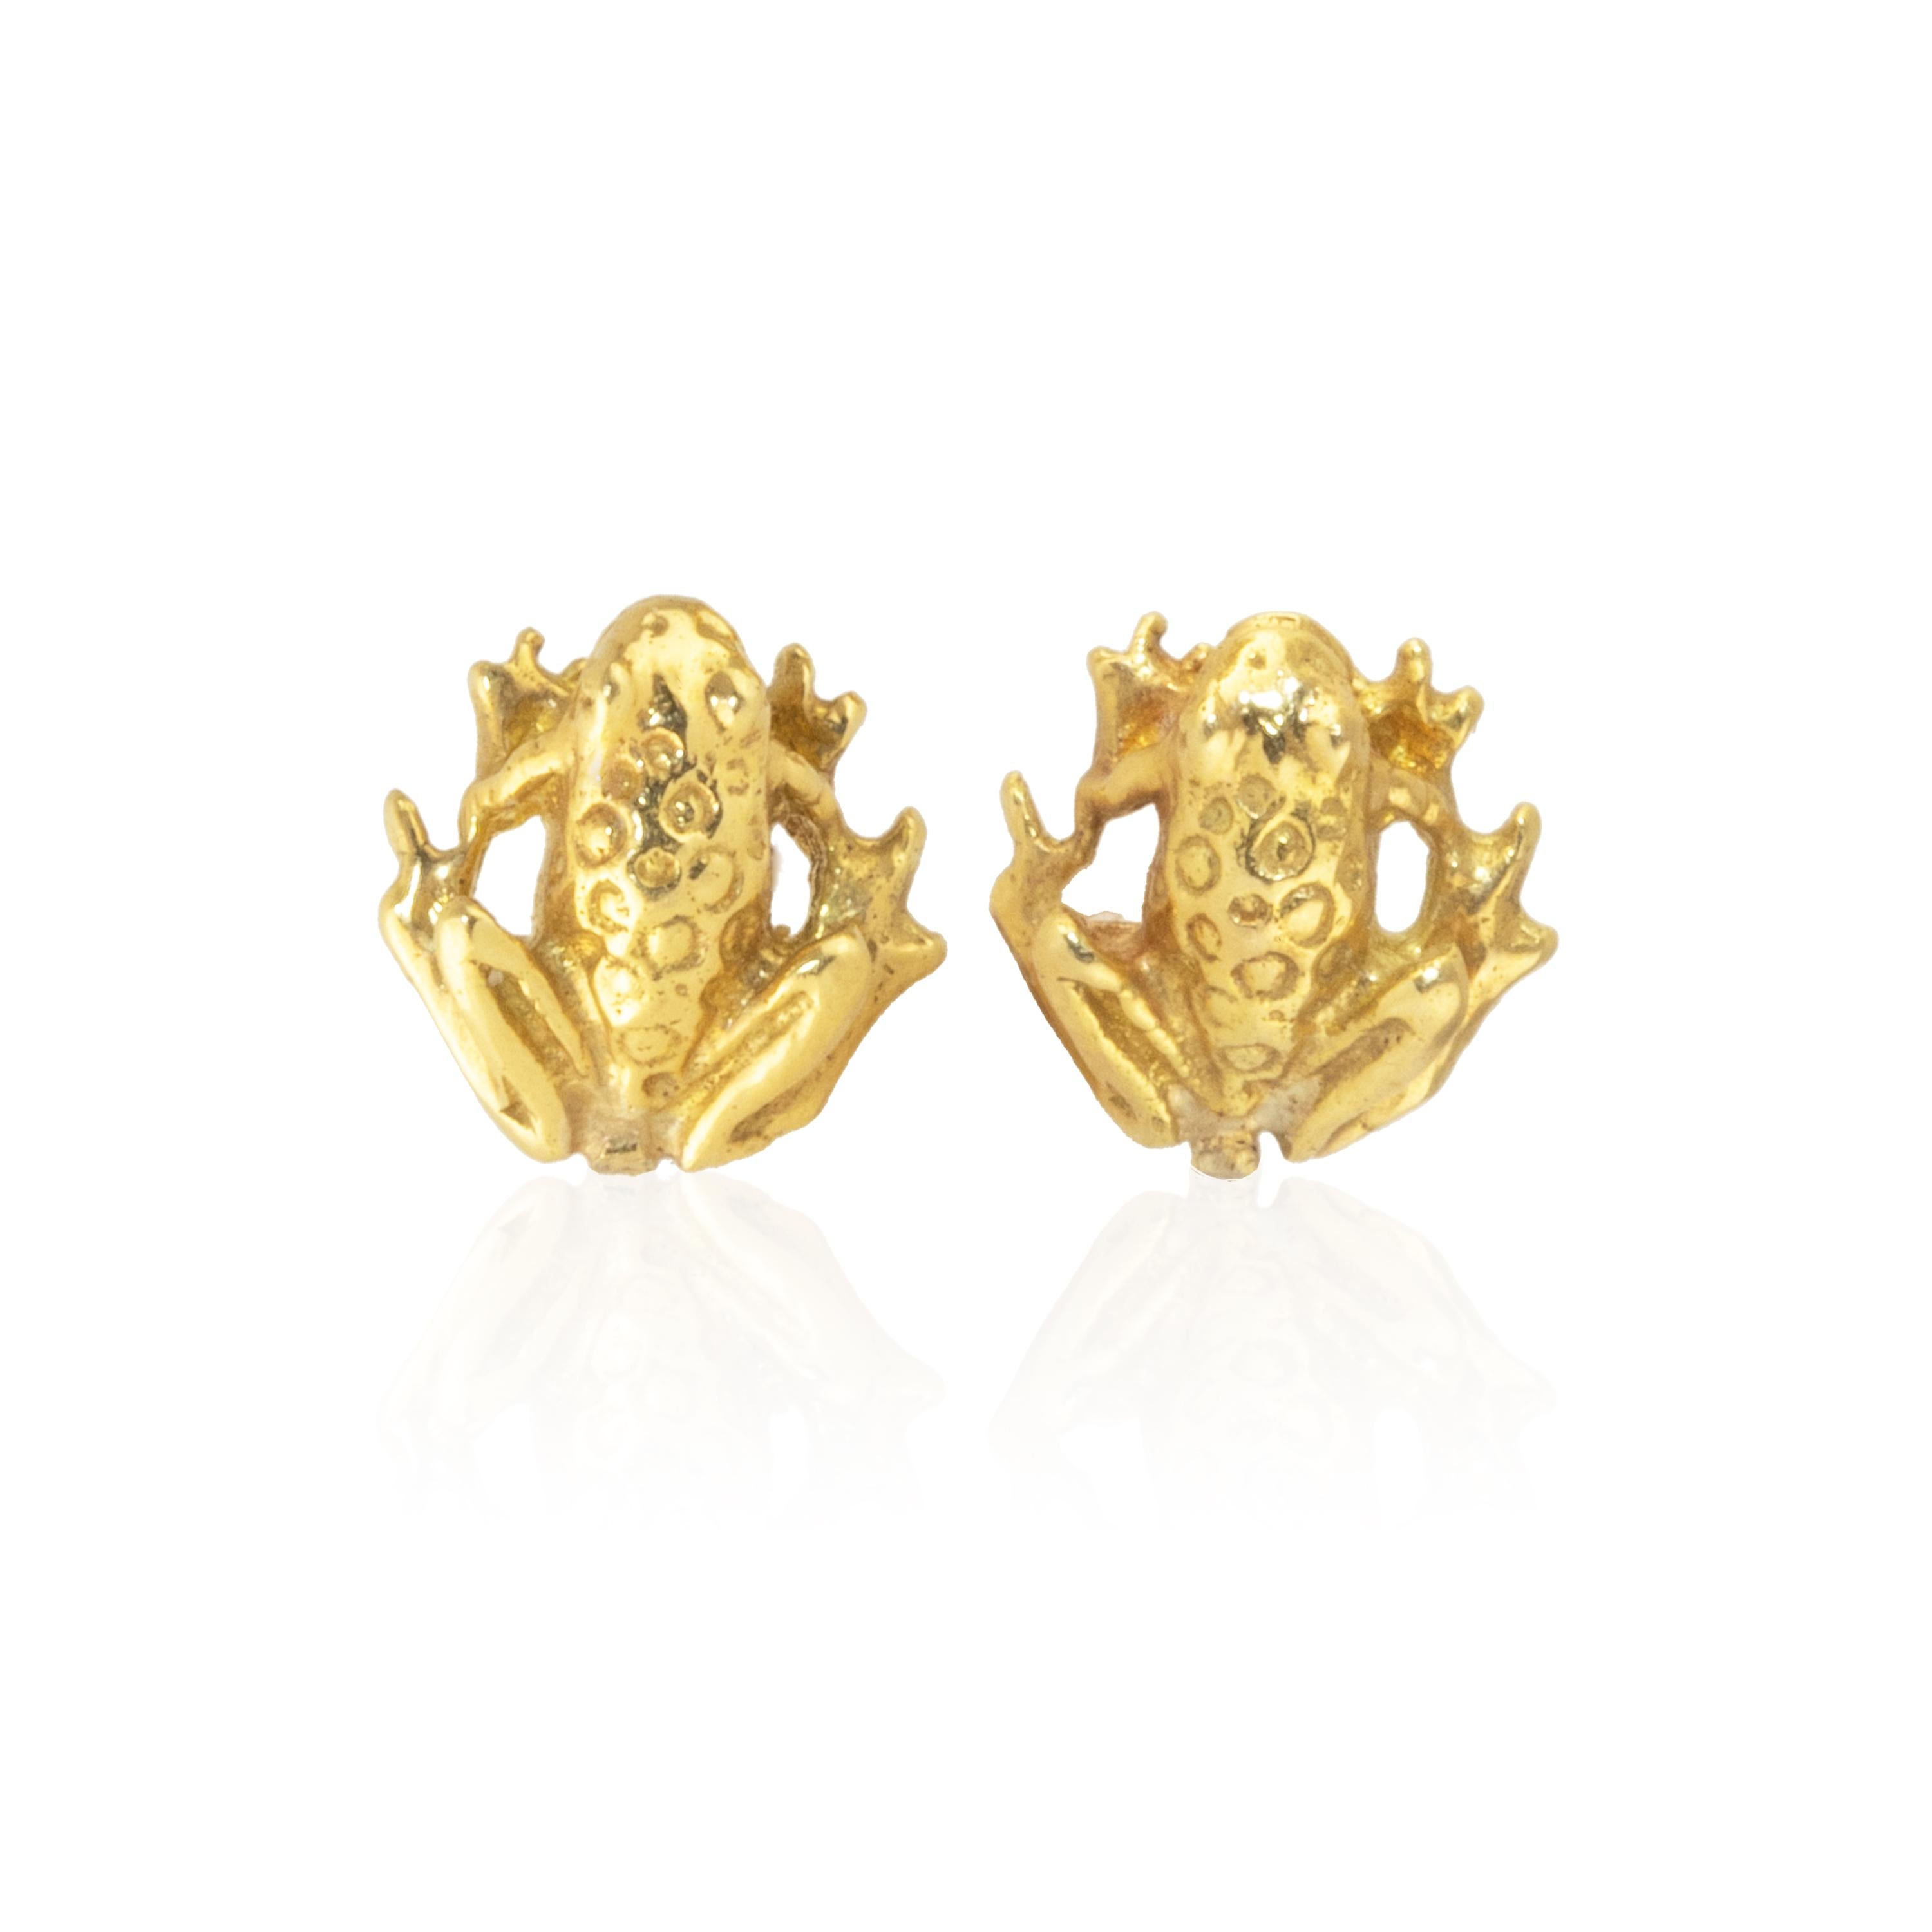 When it comes to jewelry, frogs are considered lucky charms. Wearing a piece of frog jewelry opens the wearer up to good fortune and happiness. It is considered a symbol of wealth and prosperity in Native American culture. In Ancient Egypt, the